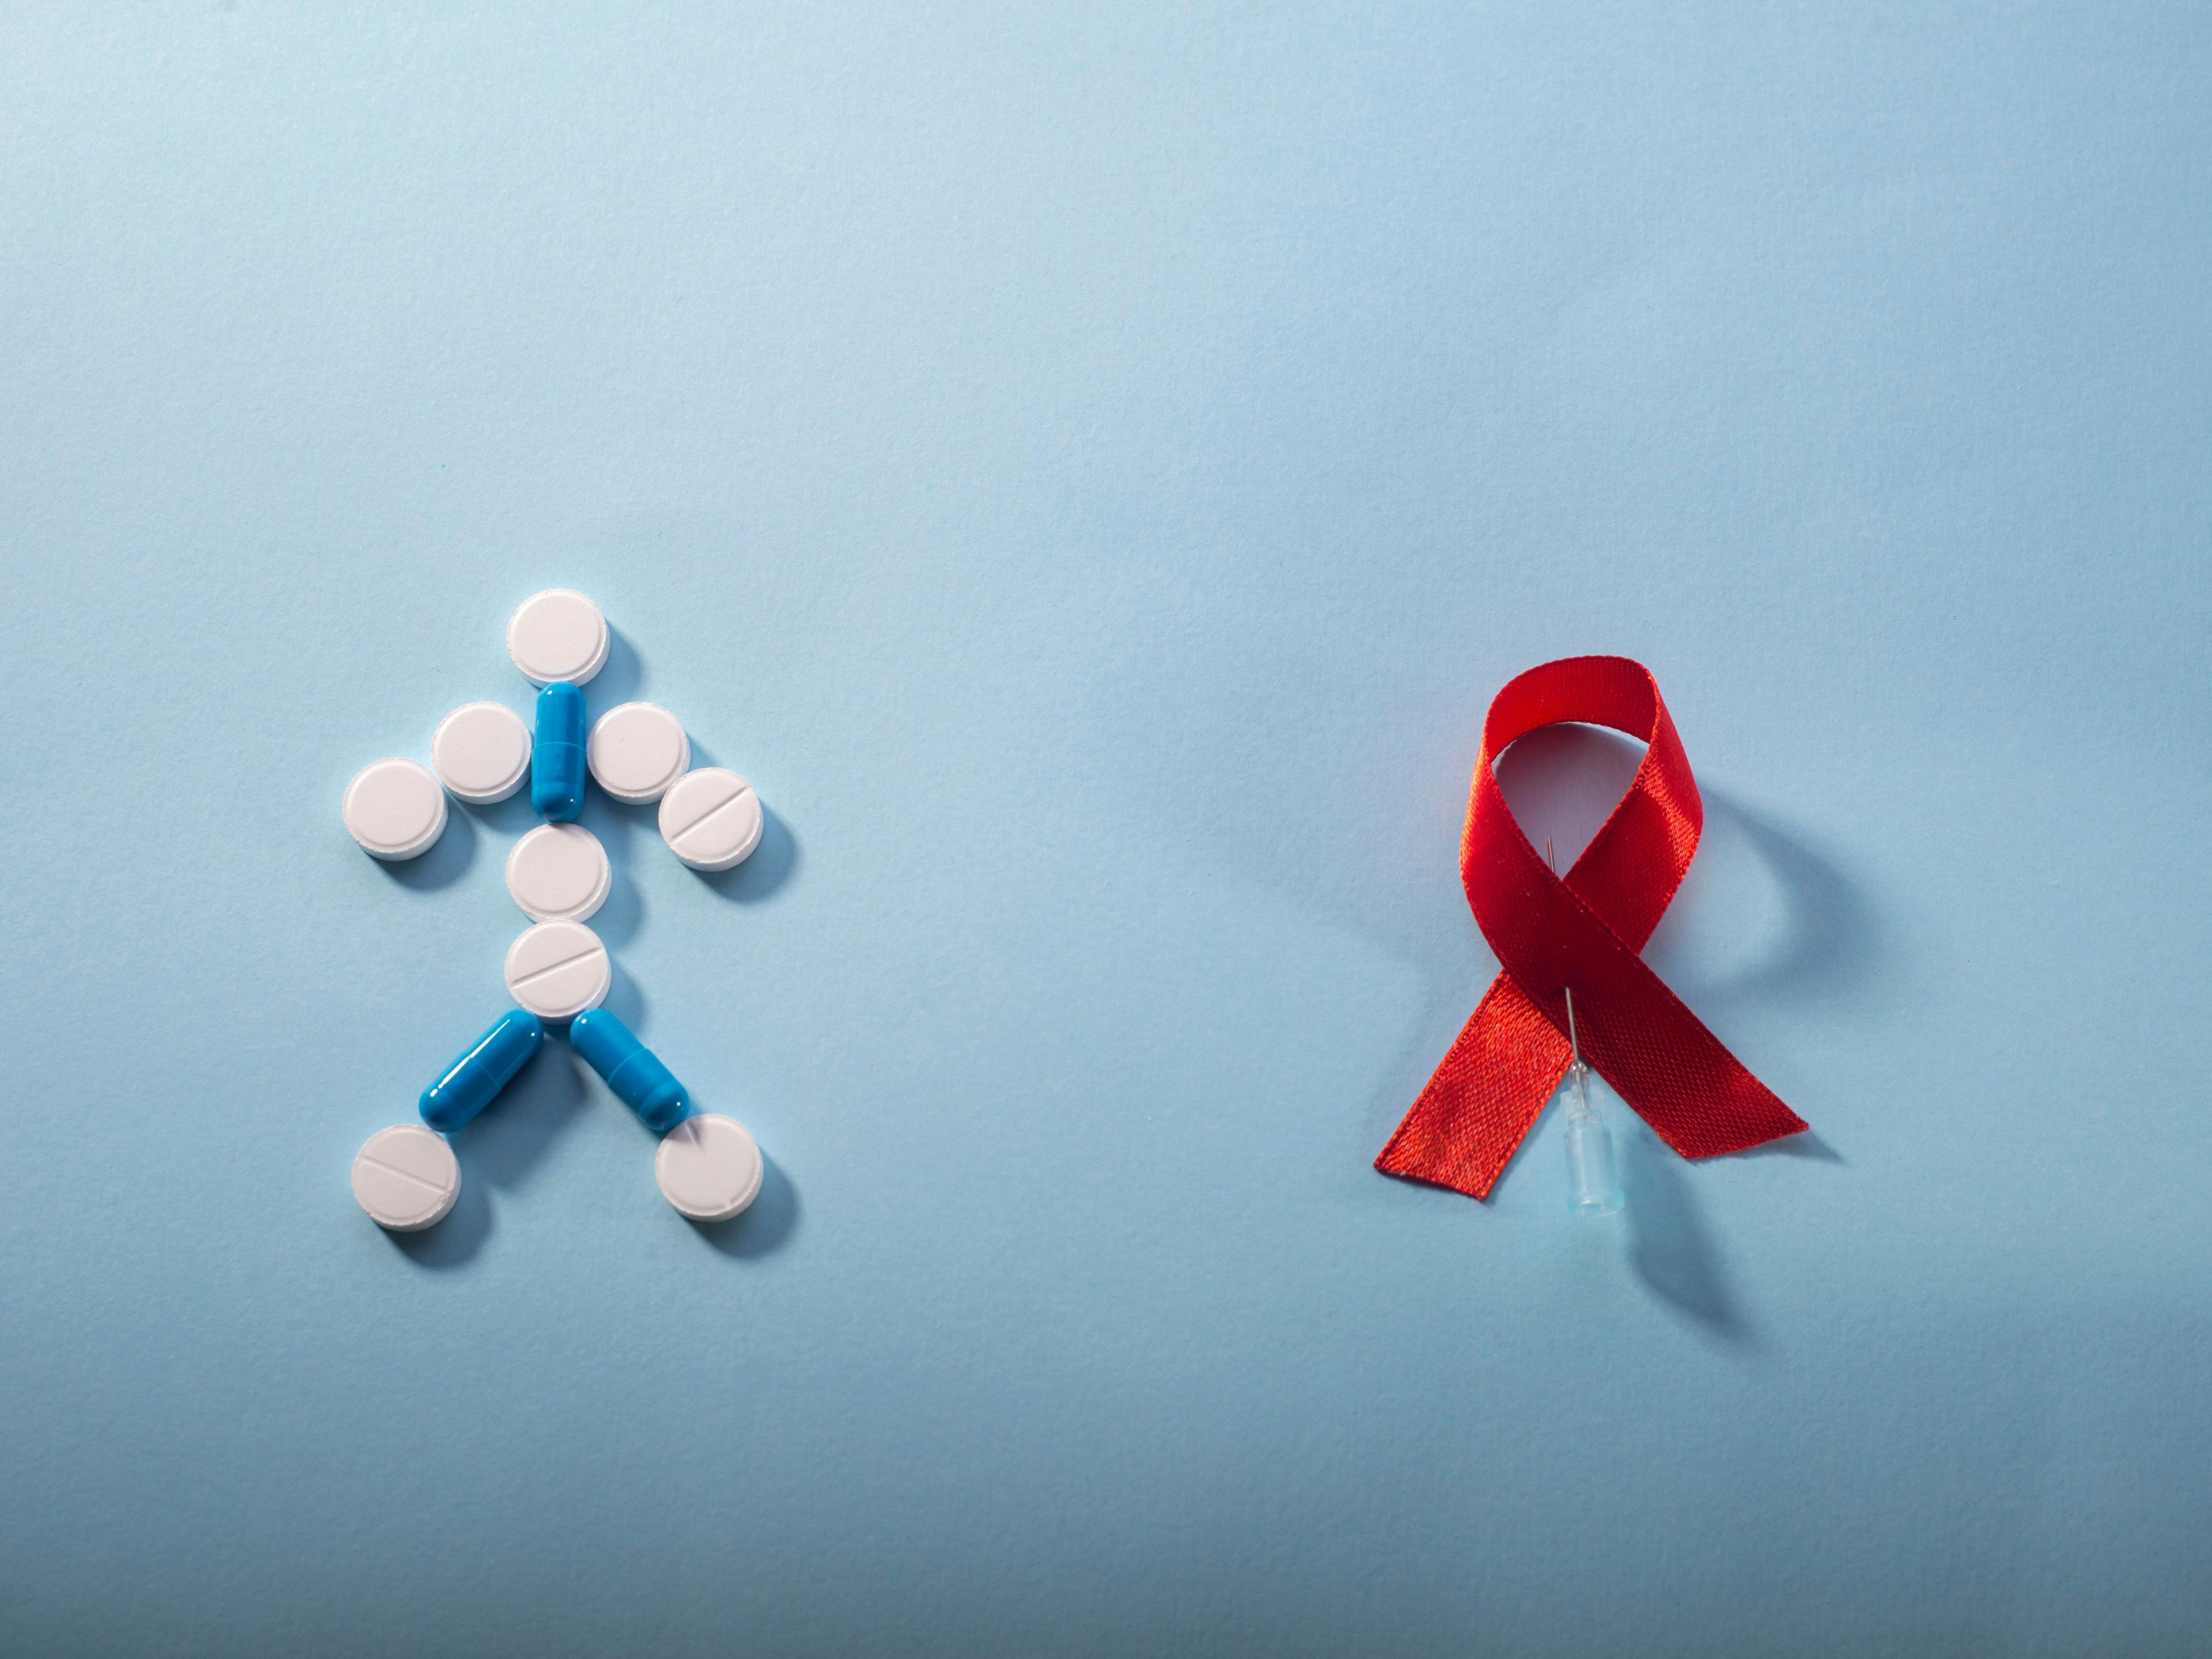 One-Quarter of Medicaid Enrollees With HIV Are Missing Out on At Least One Recommended HIV Care Service